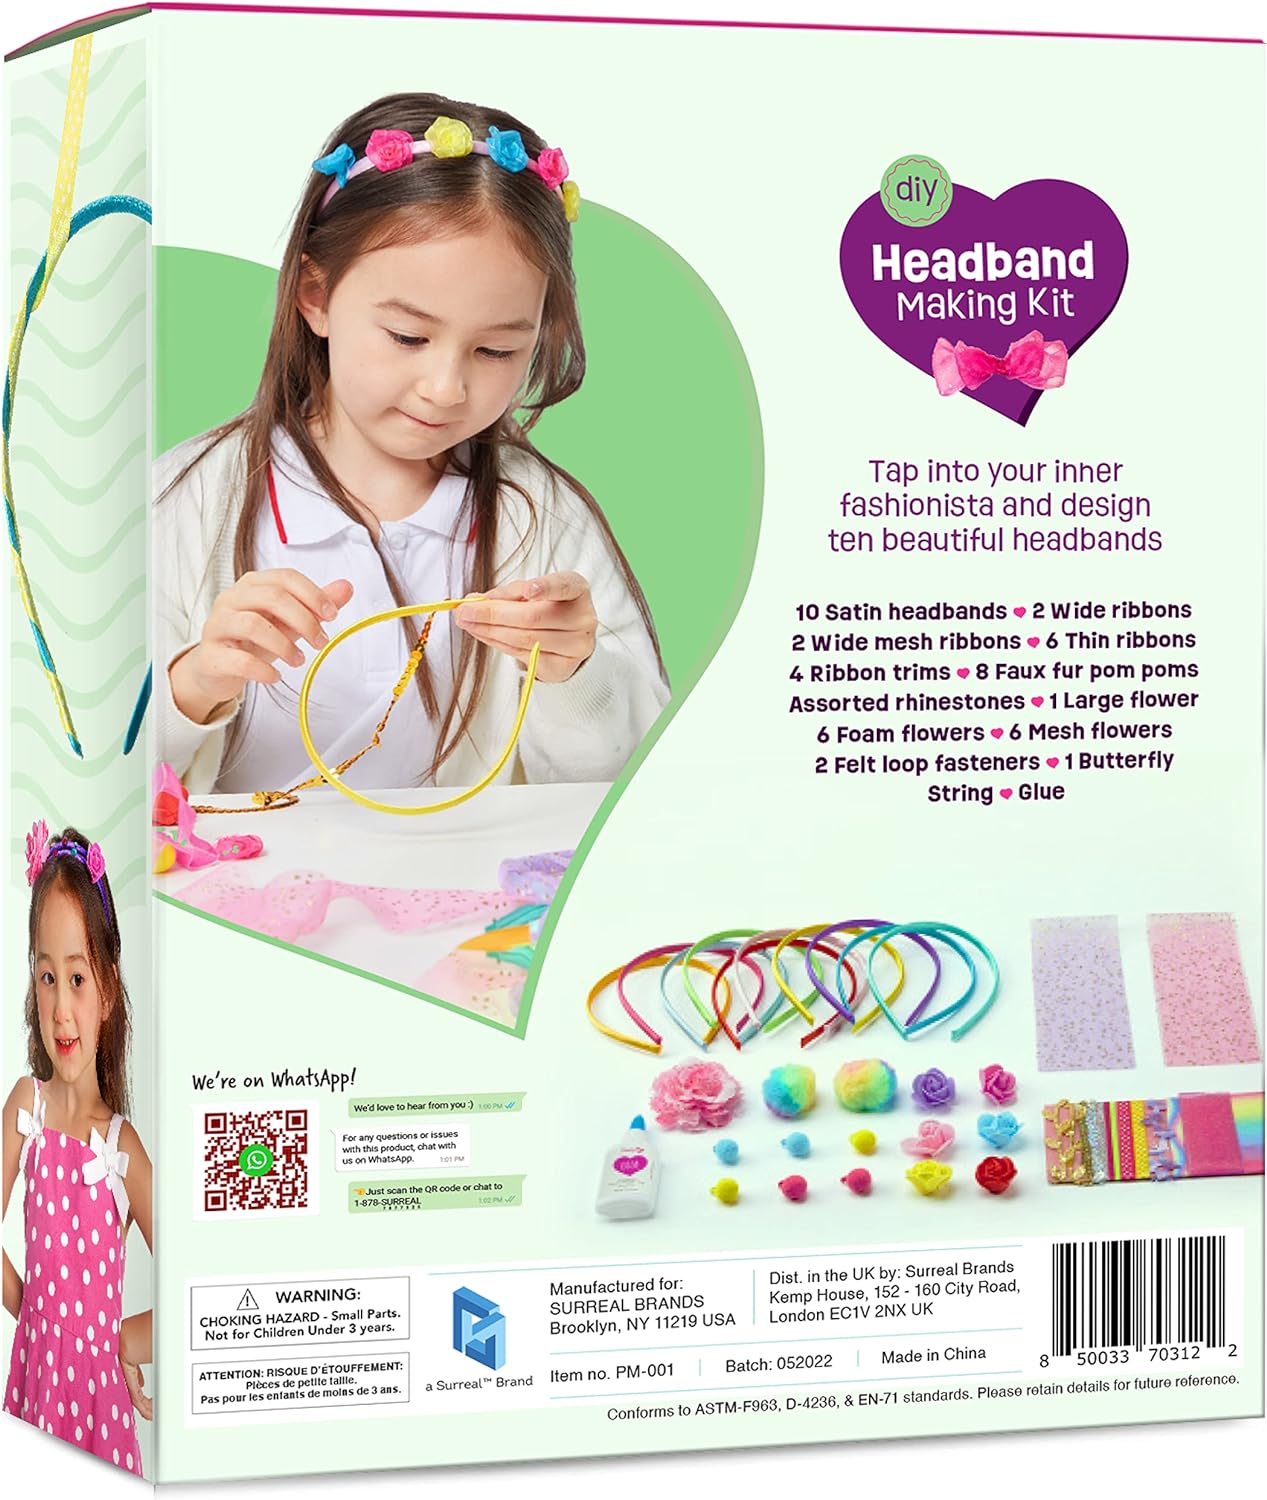 Pretty Me Headband Making Kit for Girls - Make Your Own Fashion Headbands for Kids - DIY Hair Accessories Set - Arts & Crafts Gift for Ages 5-12 Year Old Girl - Little Children's Art & Craft Gifts